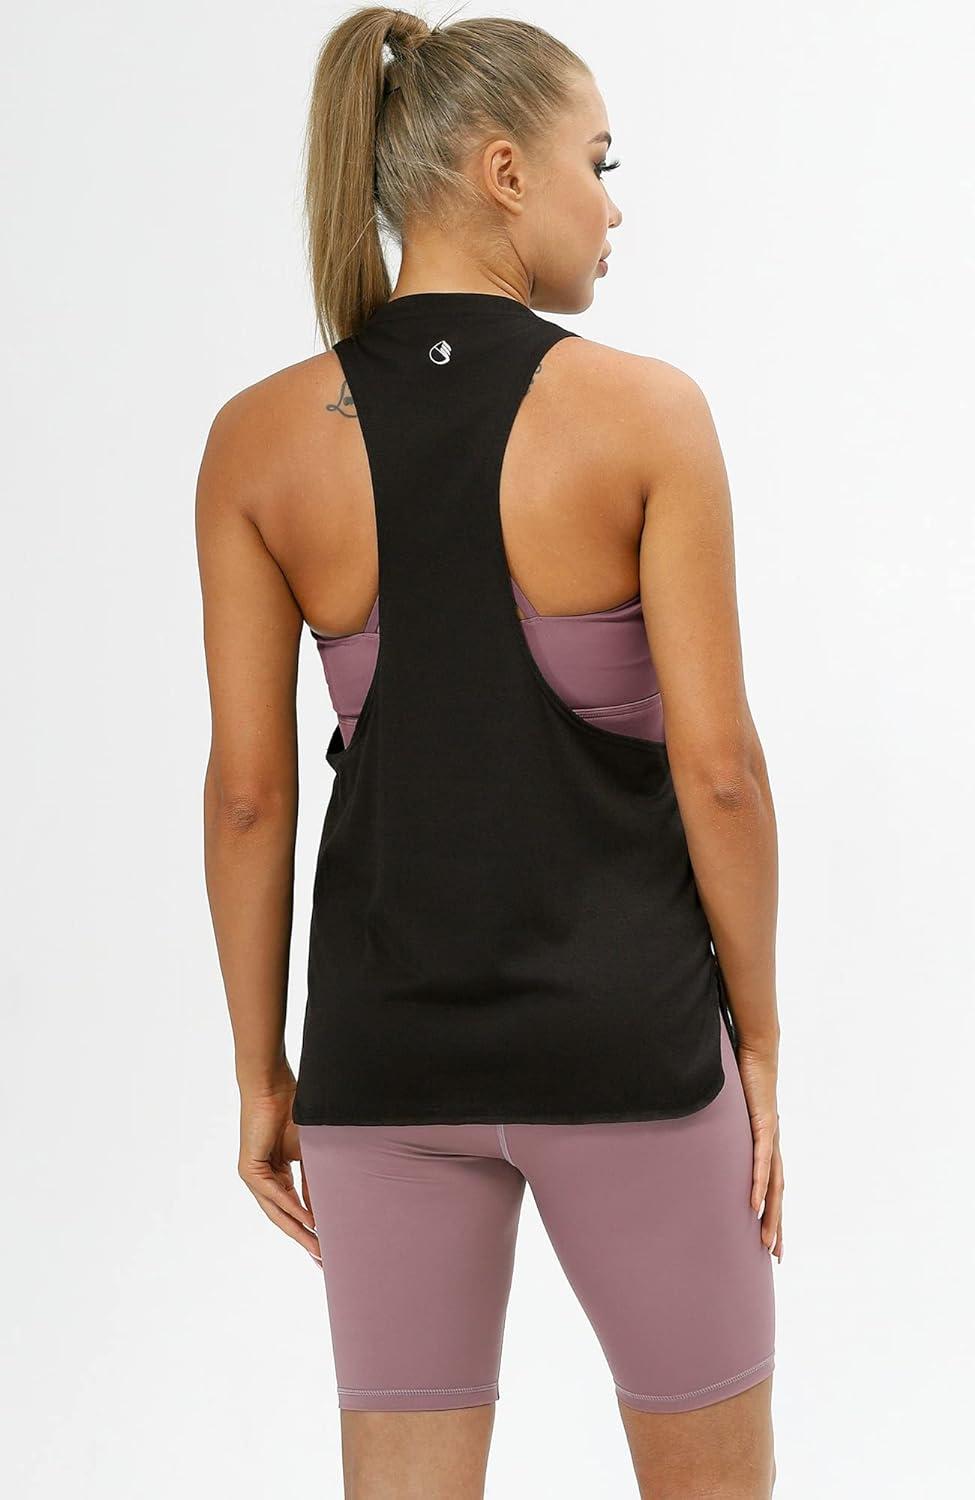 icyzone Workout Tank Tops for Women - Running Muscle Tank Sport